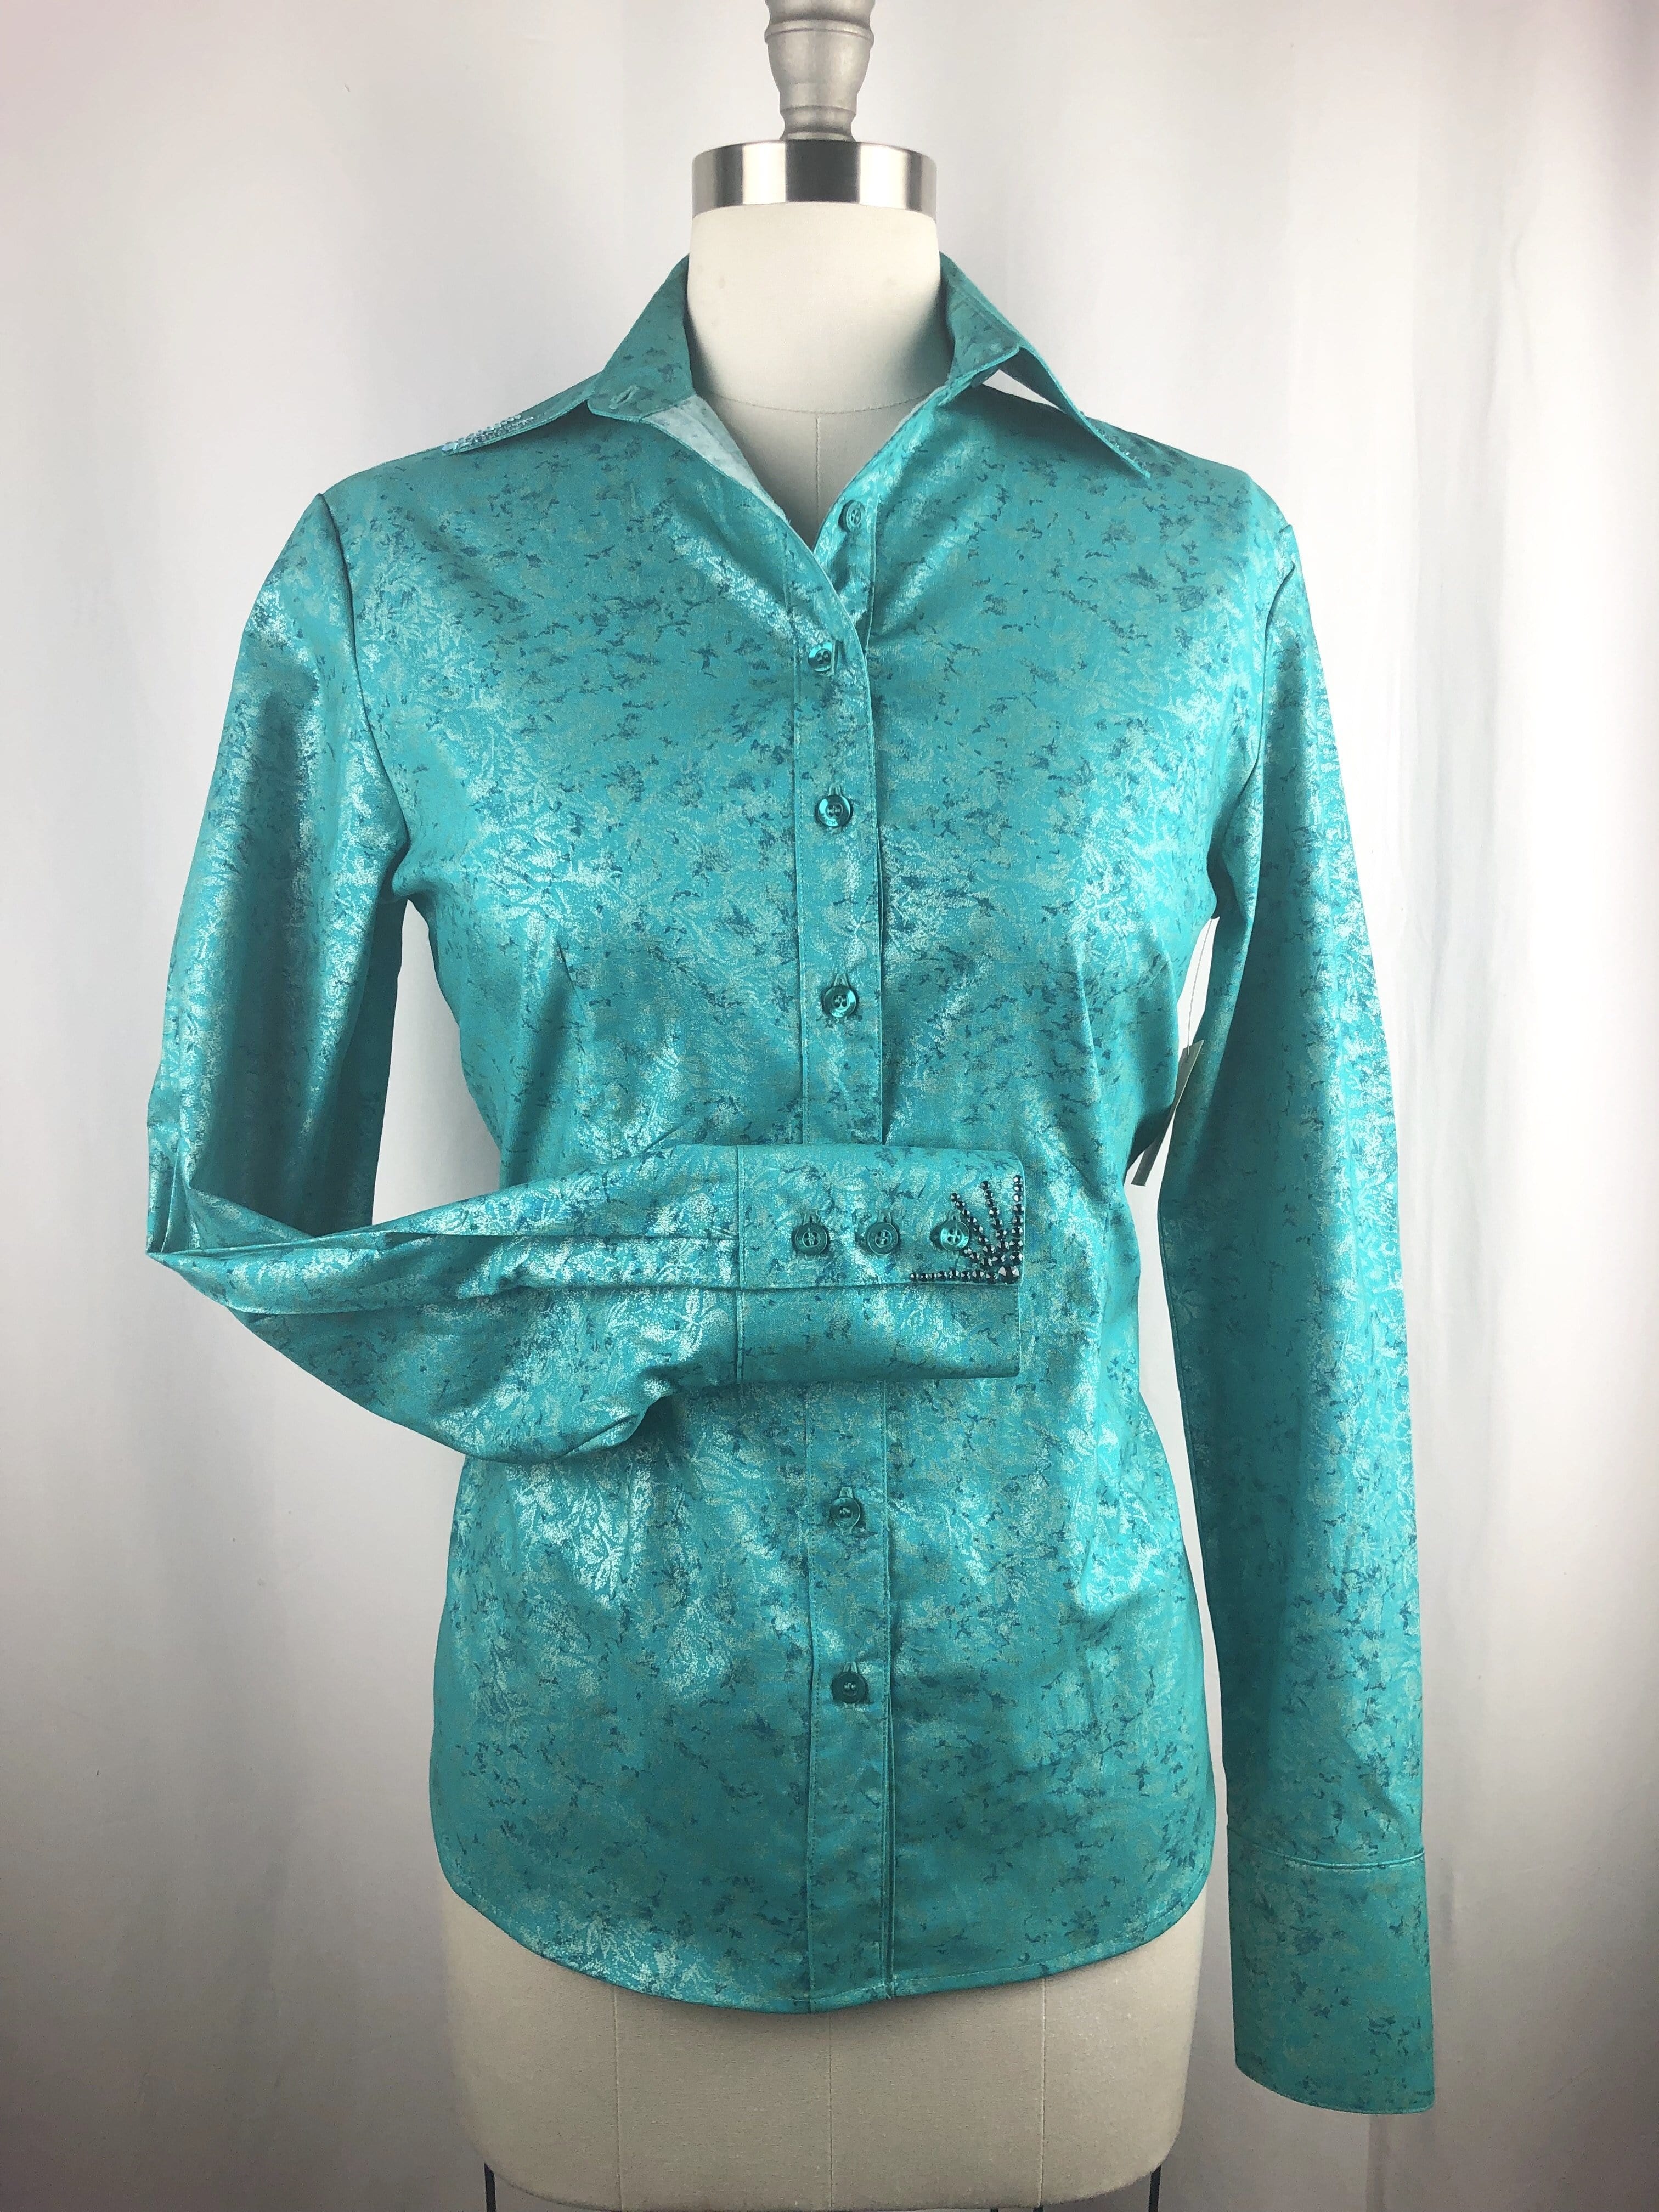 Buy CR Special Teal Fairy Frost at CR RanchWear for only $299.00